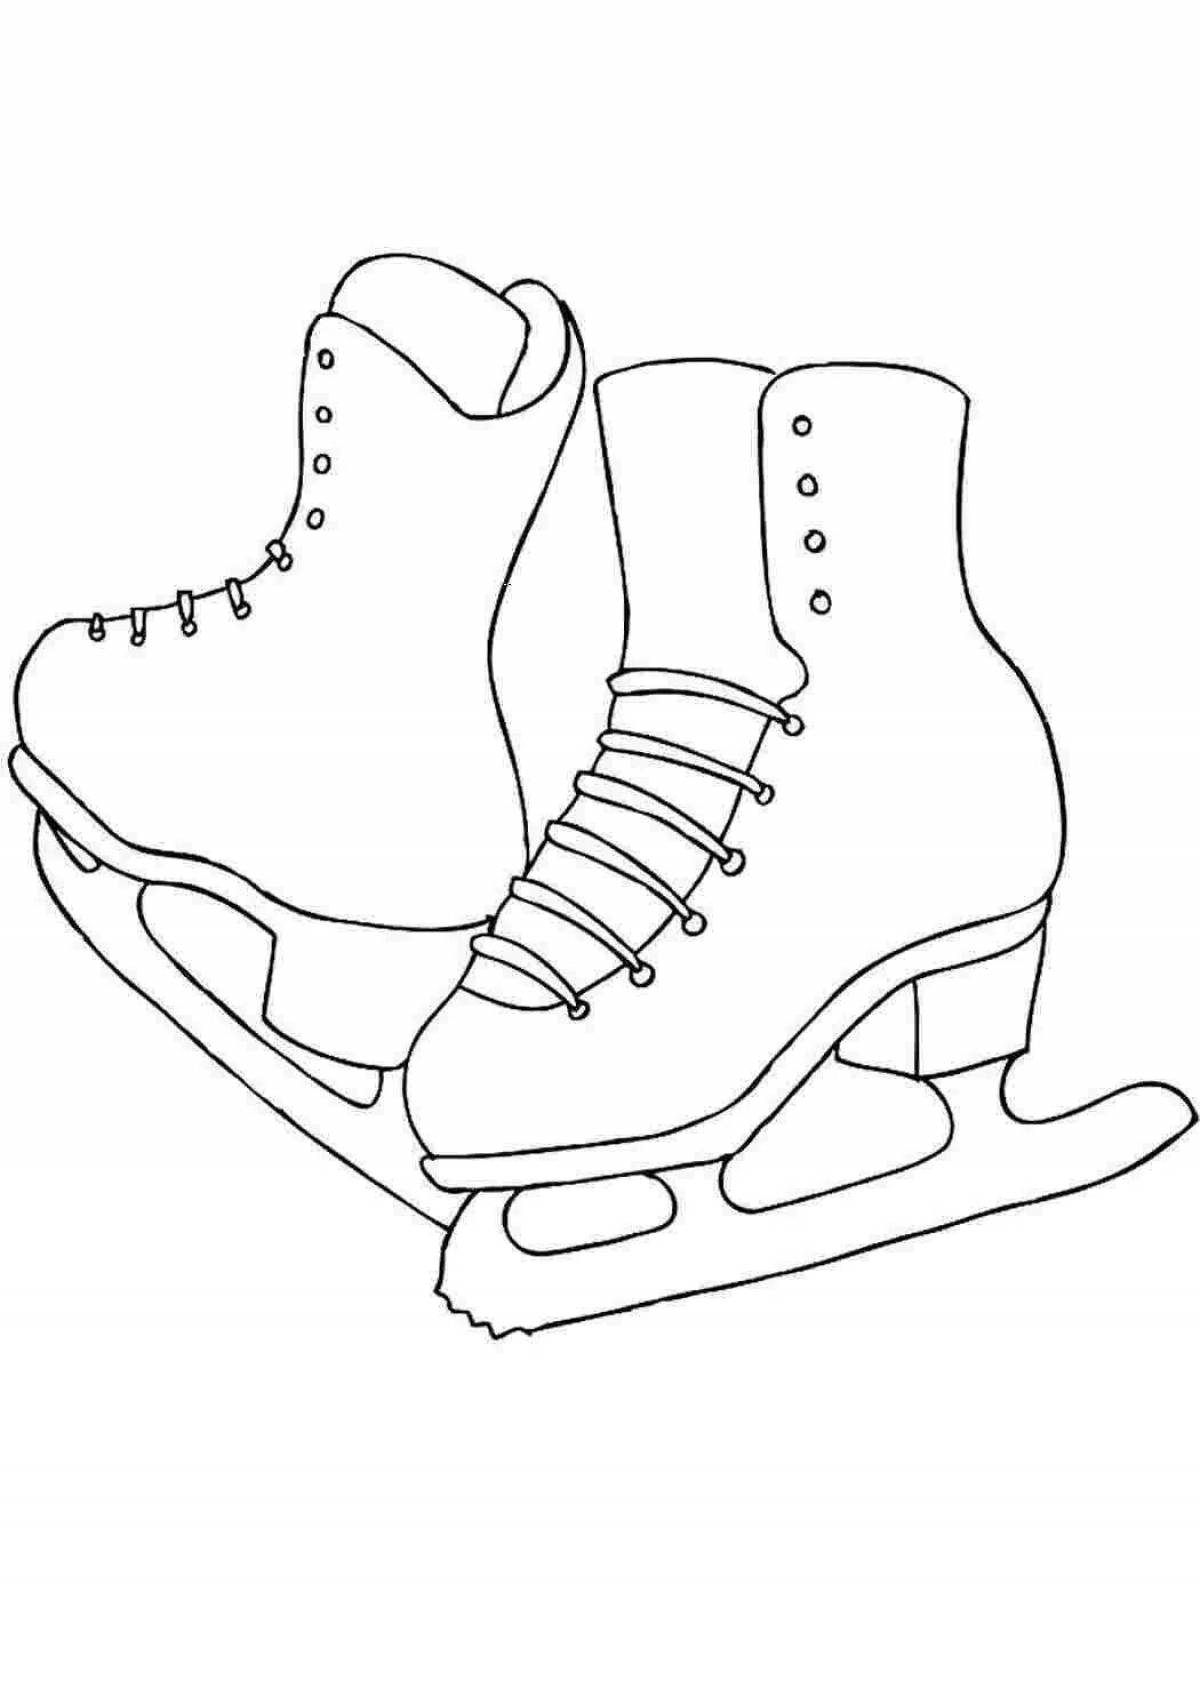 Intriguing skate coloring page